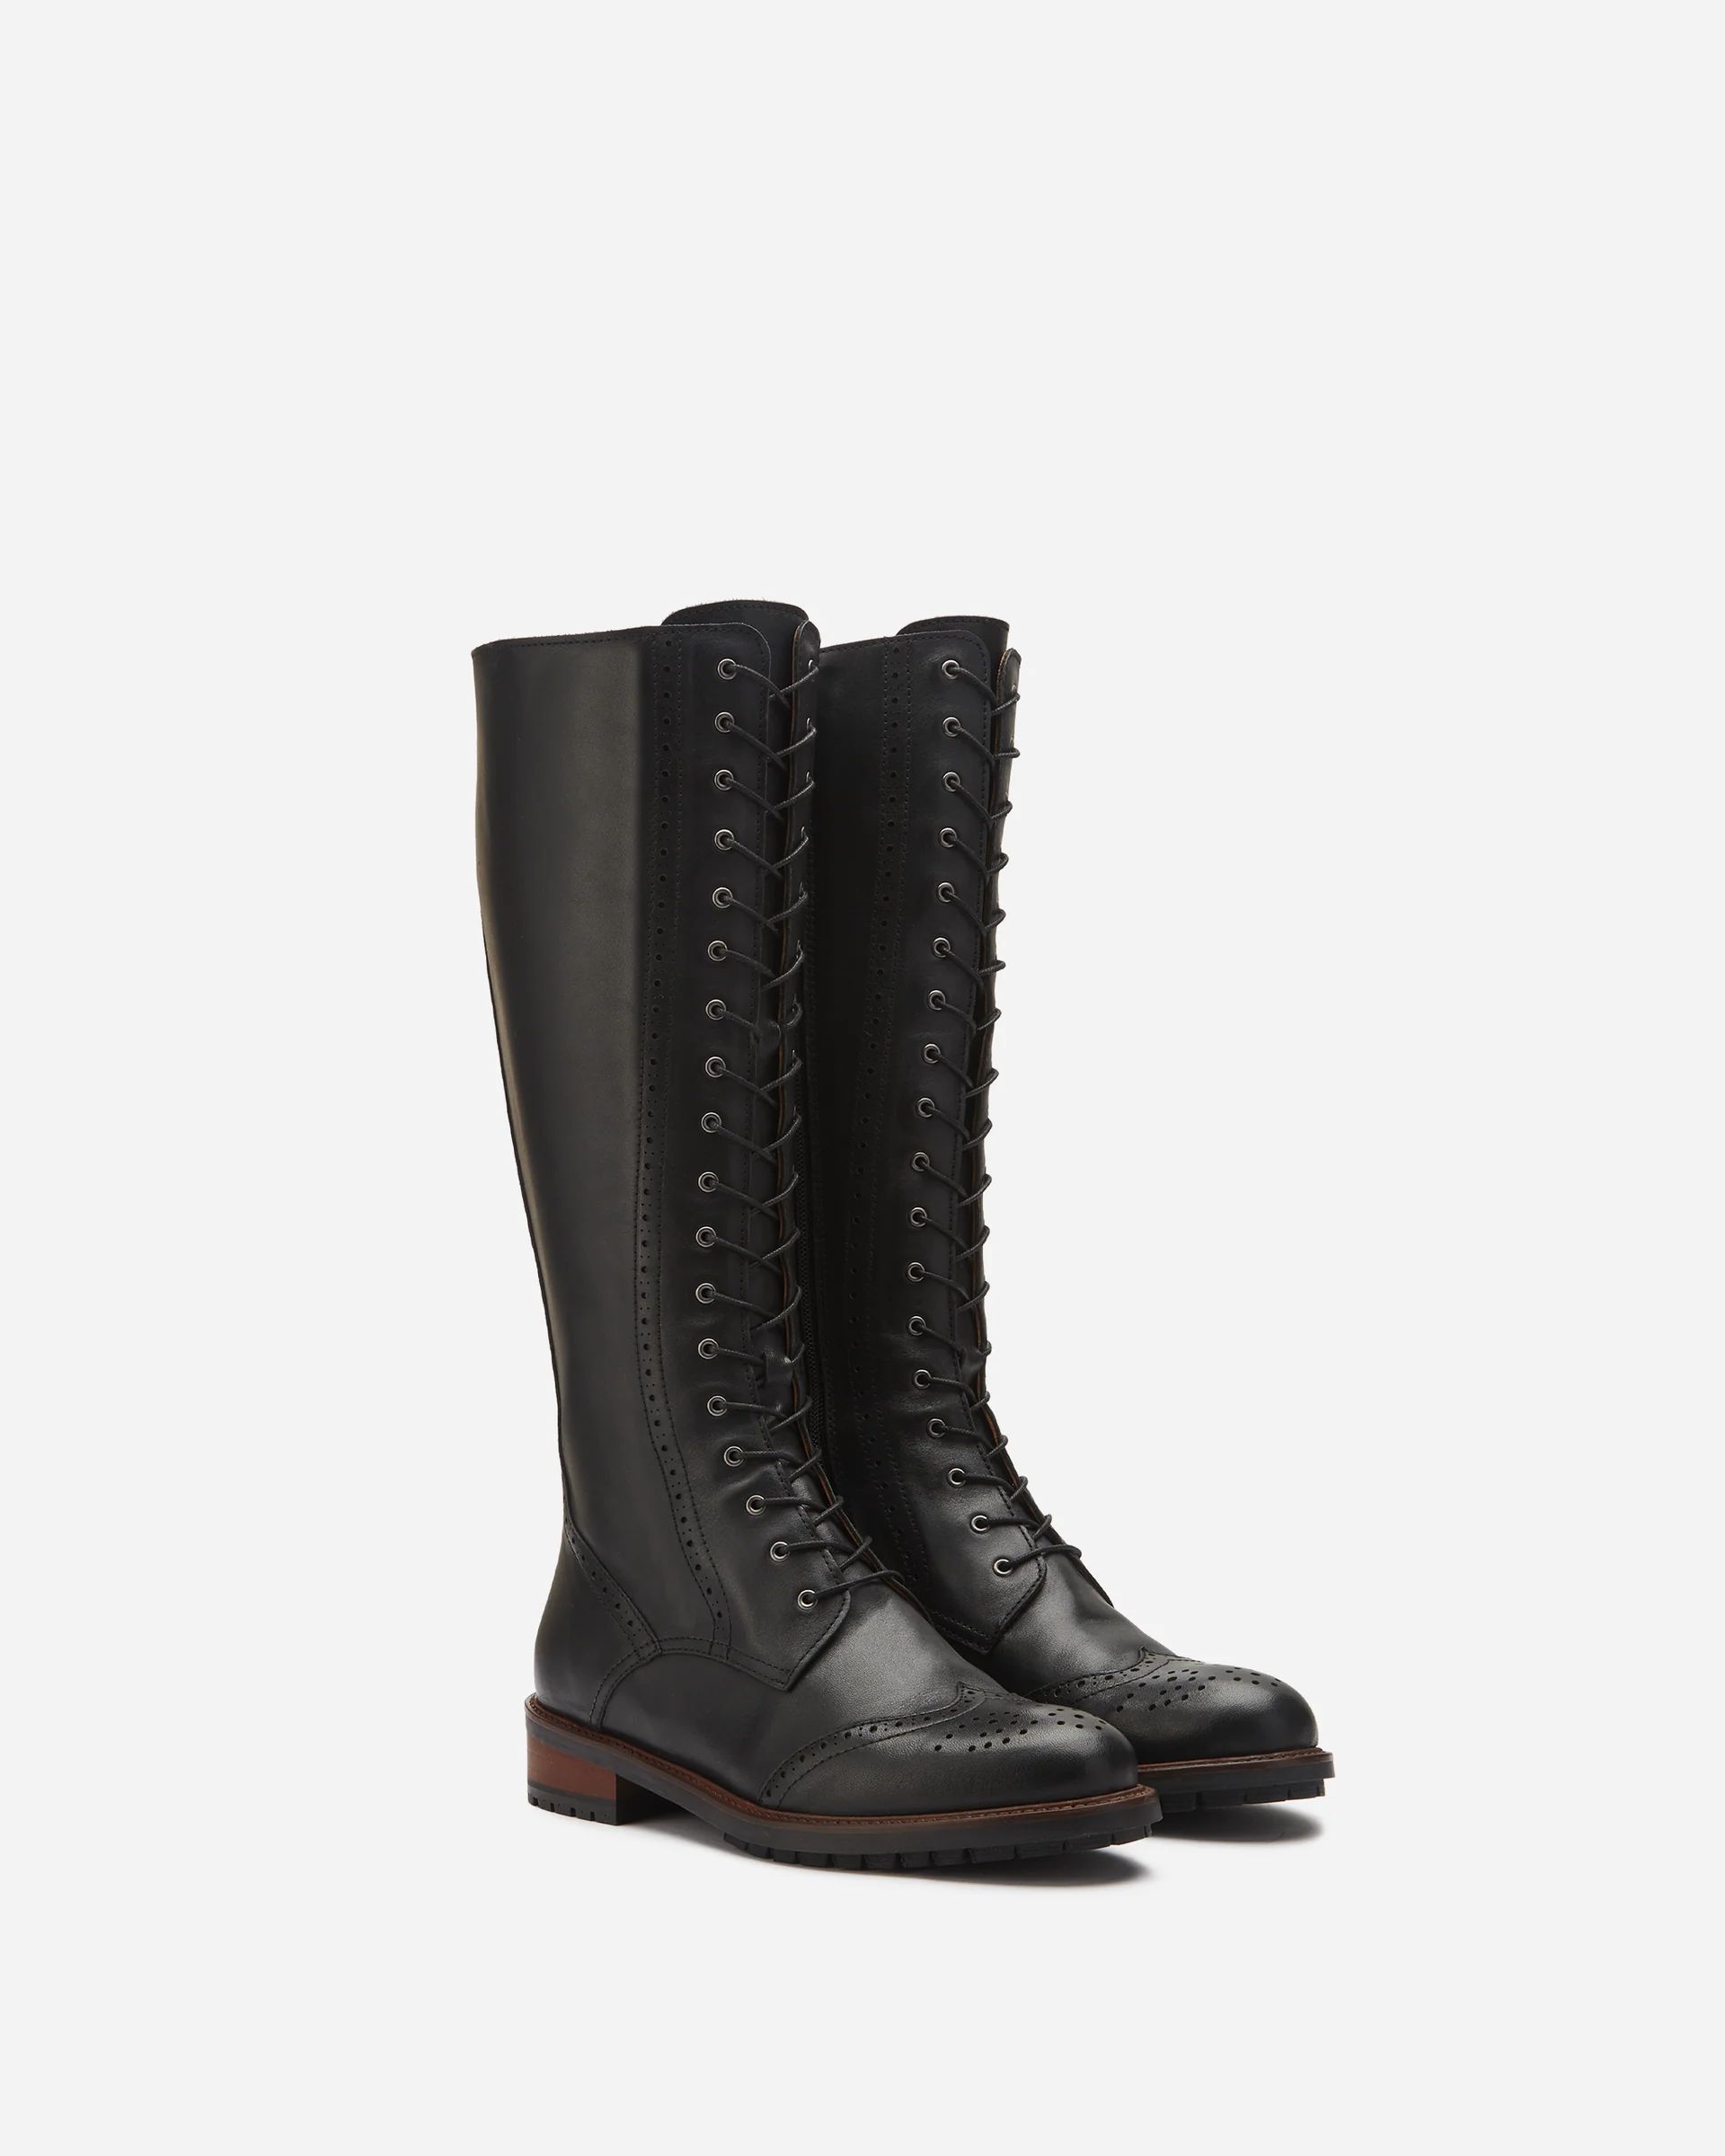 Marvel Knee High Boots in Black Leather | DuoBoots